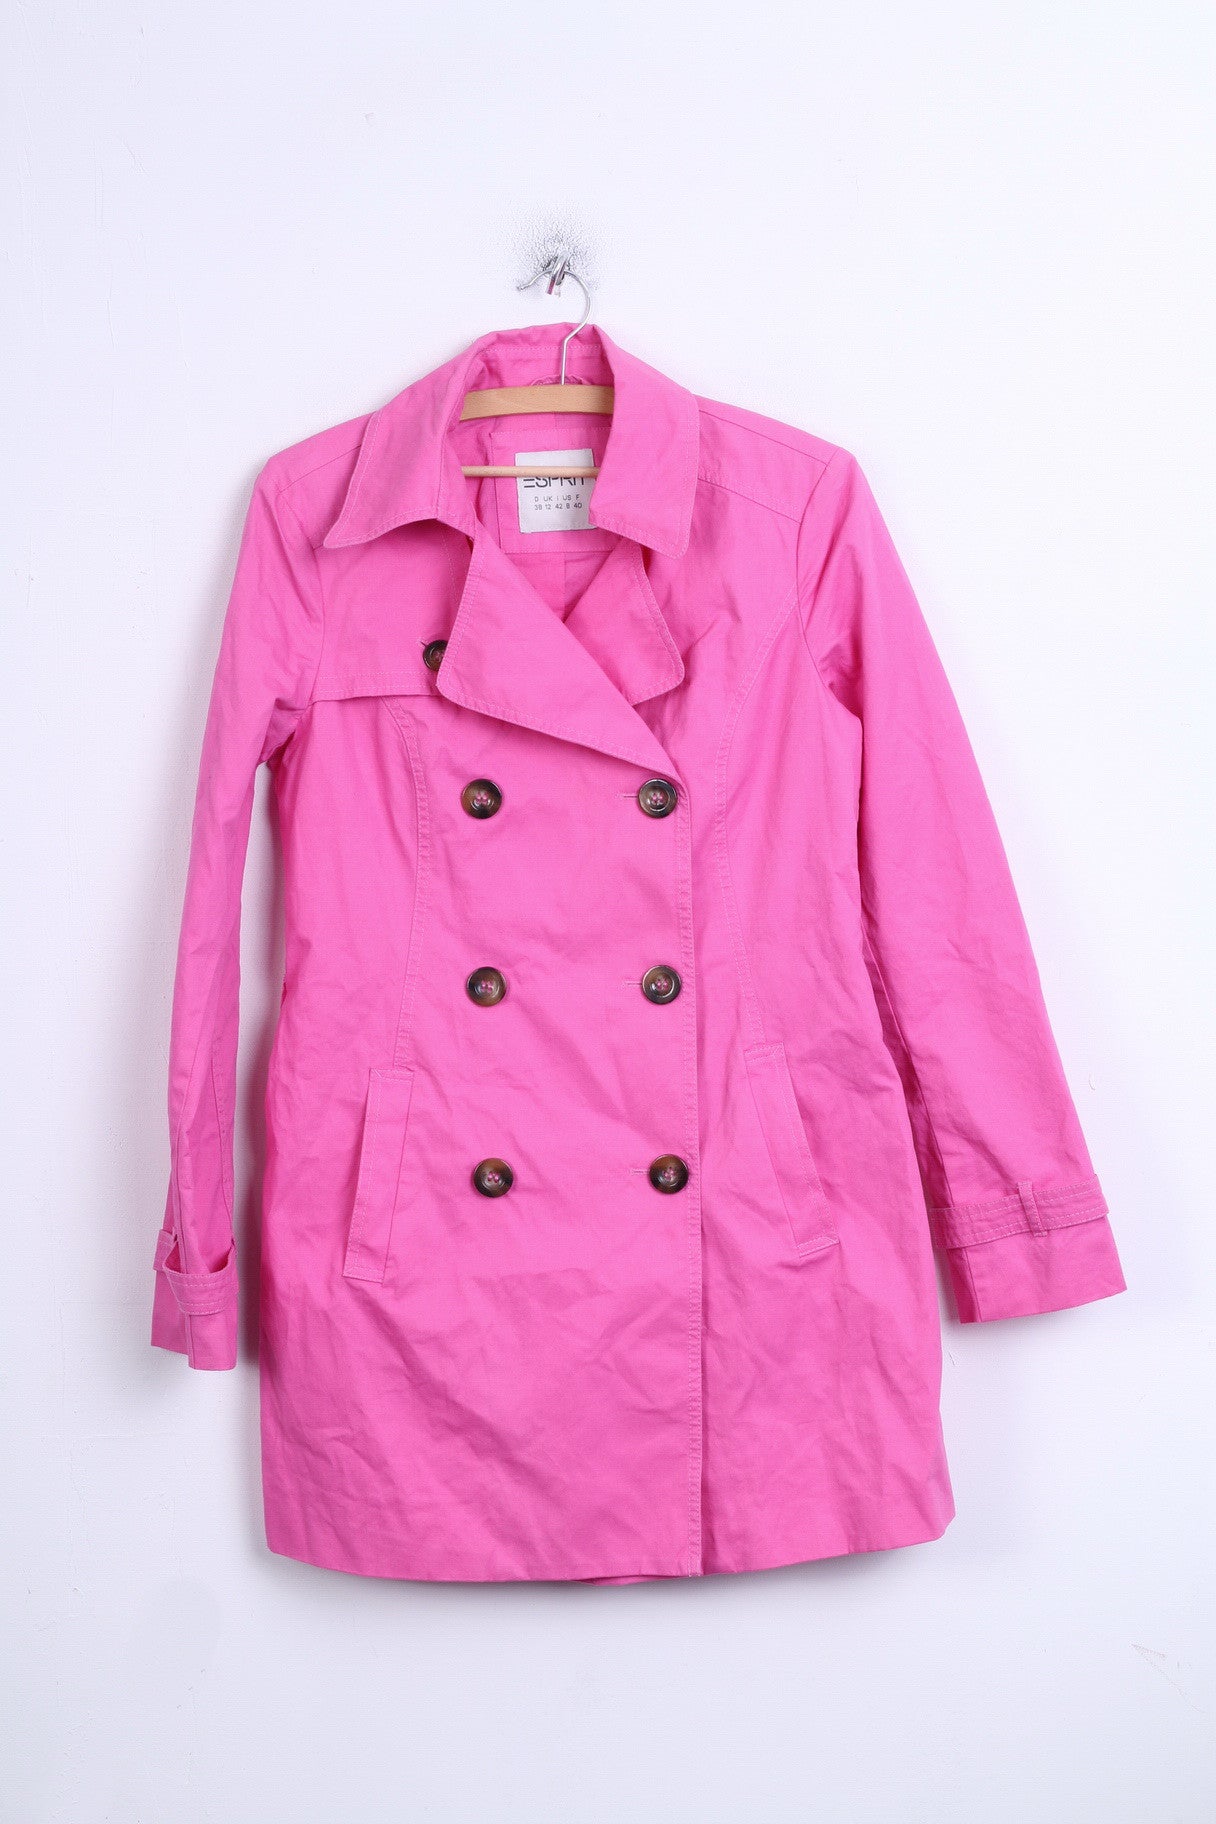 ESPRIT Womens 12 40 Trench Double Breasted Cotton Pink - RetrospectClothes